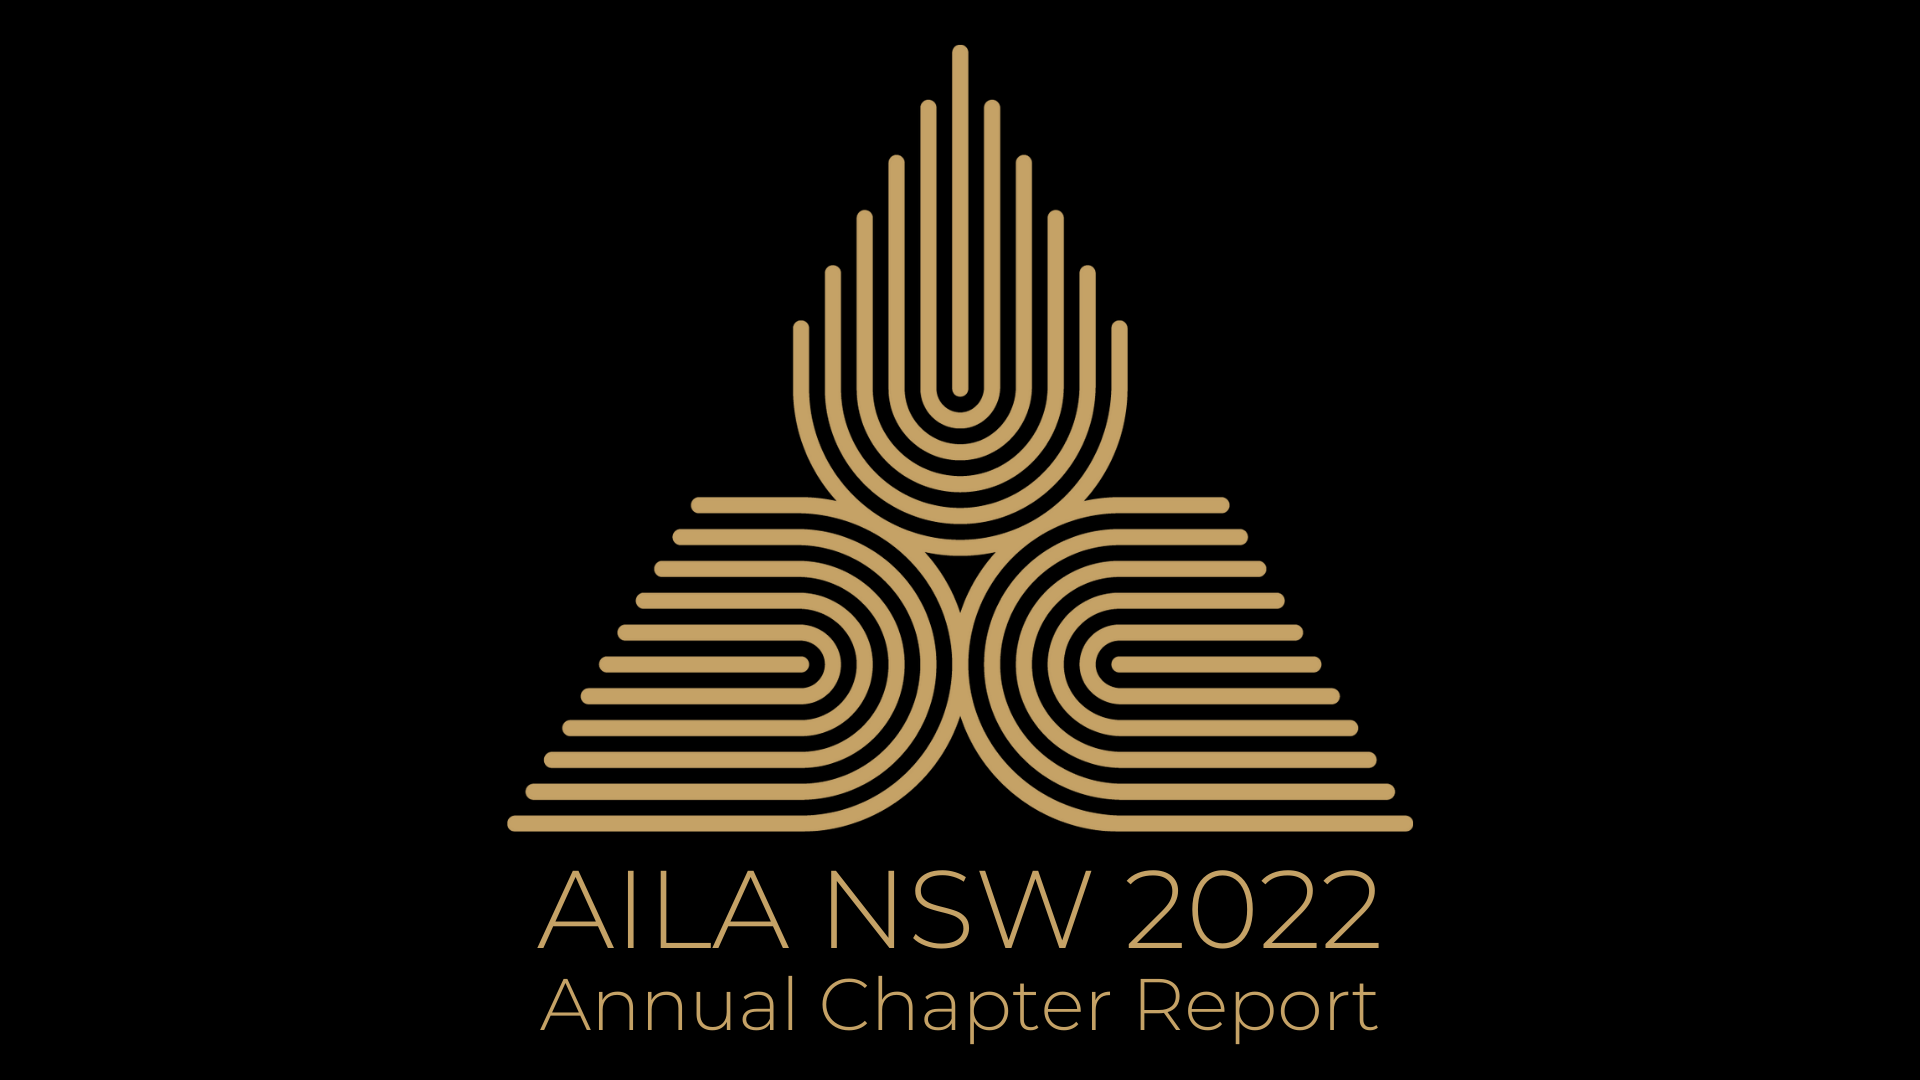 NSW 2022 Annual Chapter Report